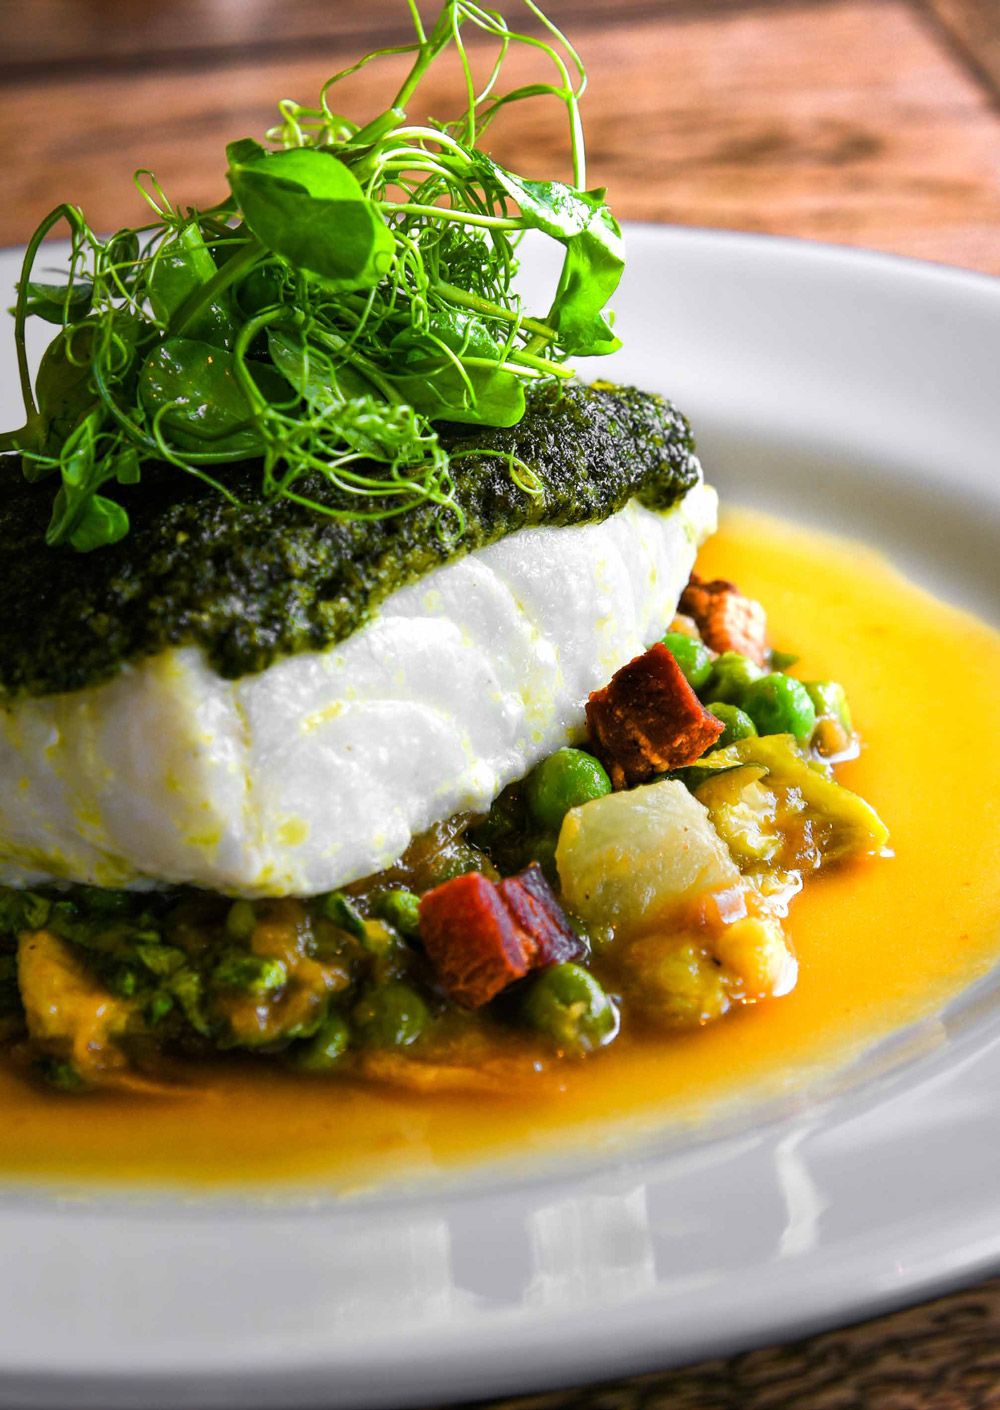 Herb-Crumbed Cod, Peas, Lettuce and Bacon | Corner House Restaurants